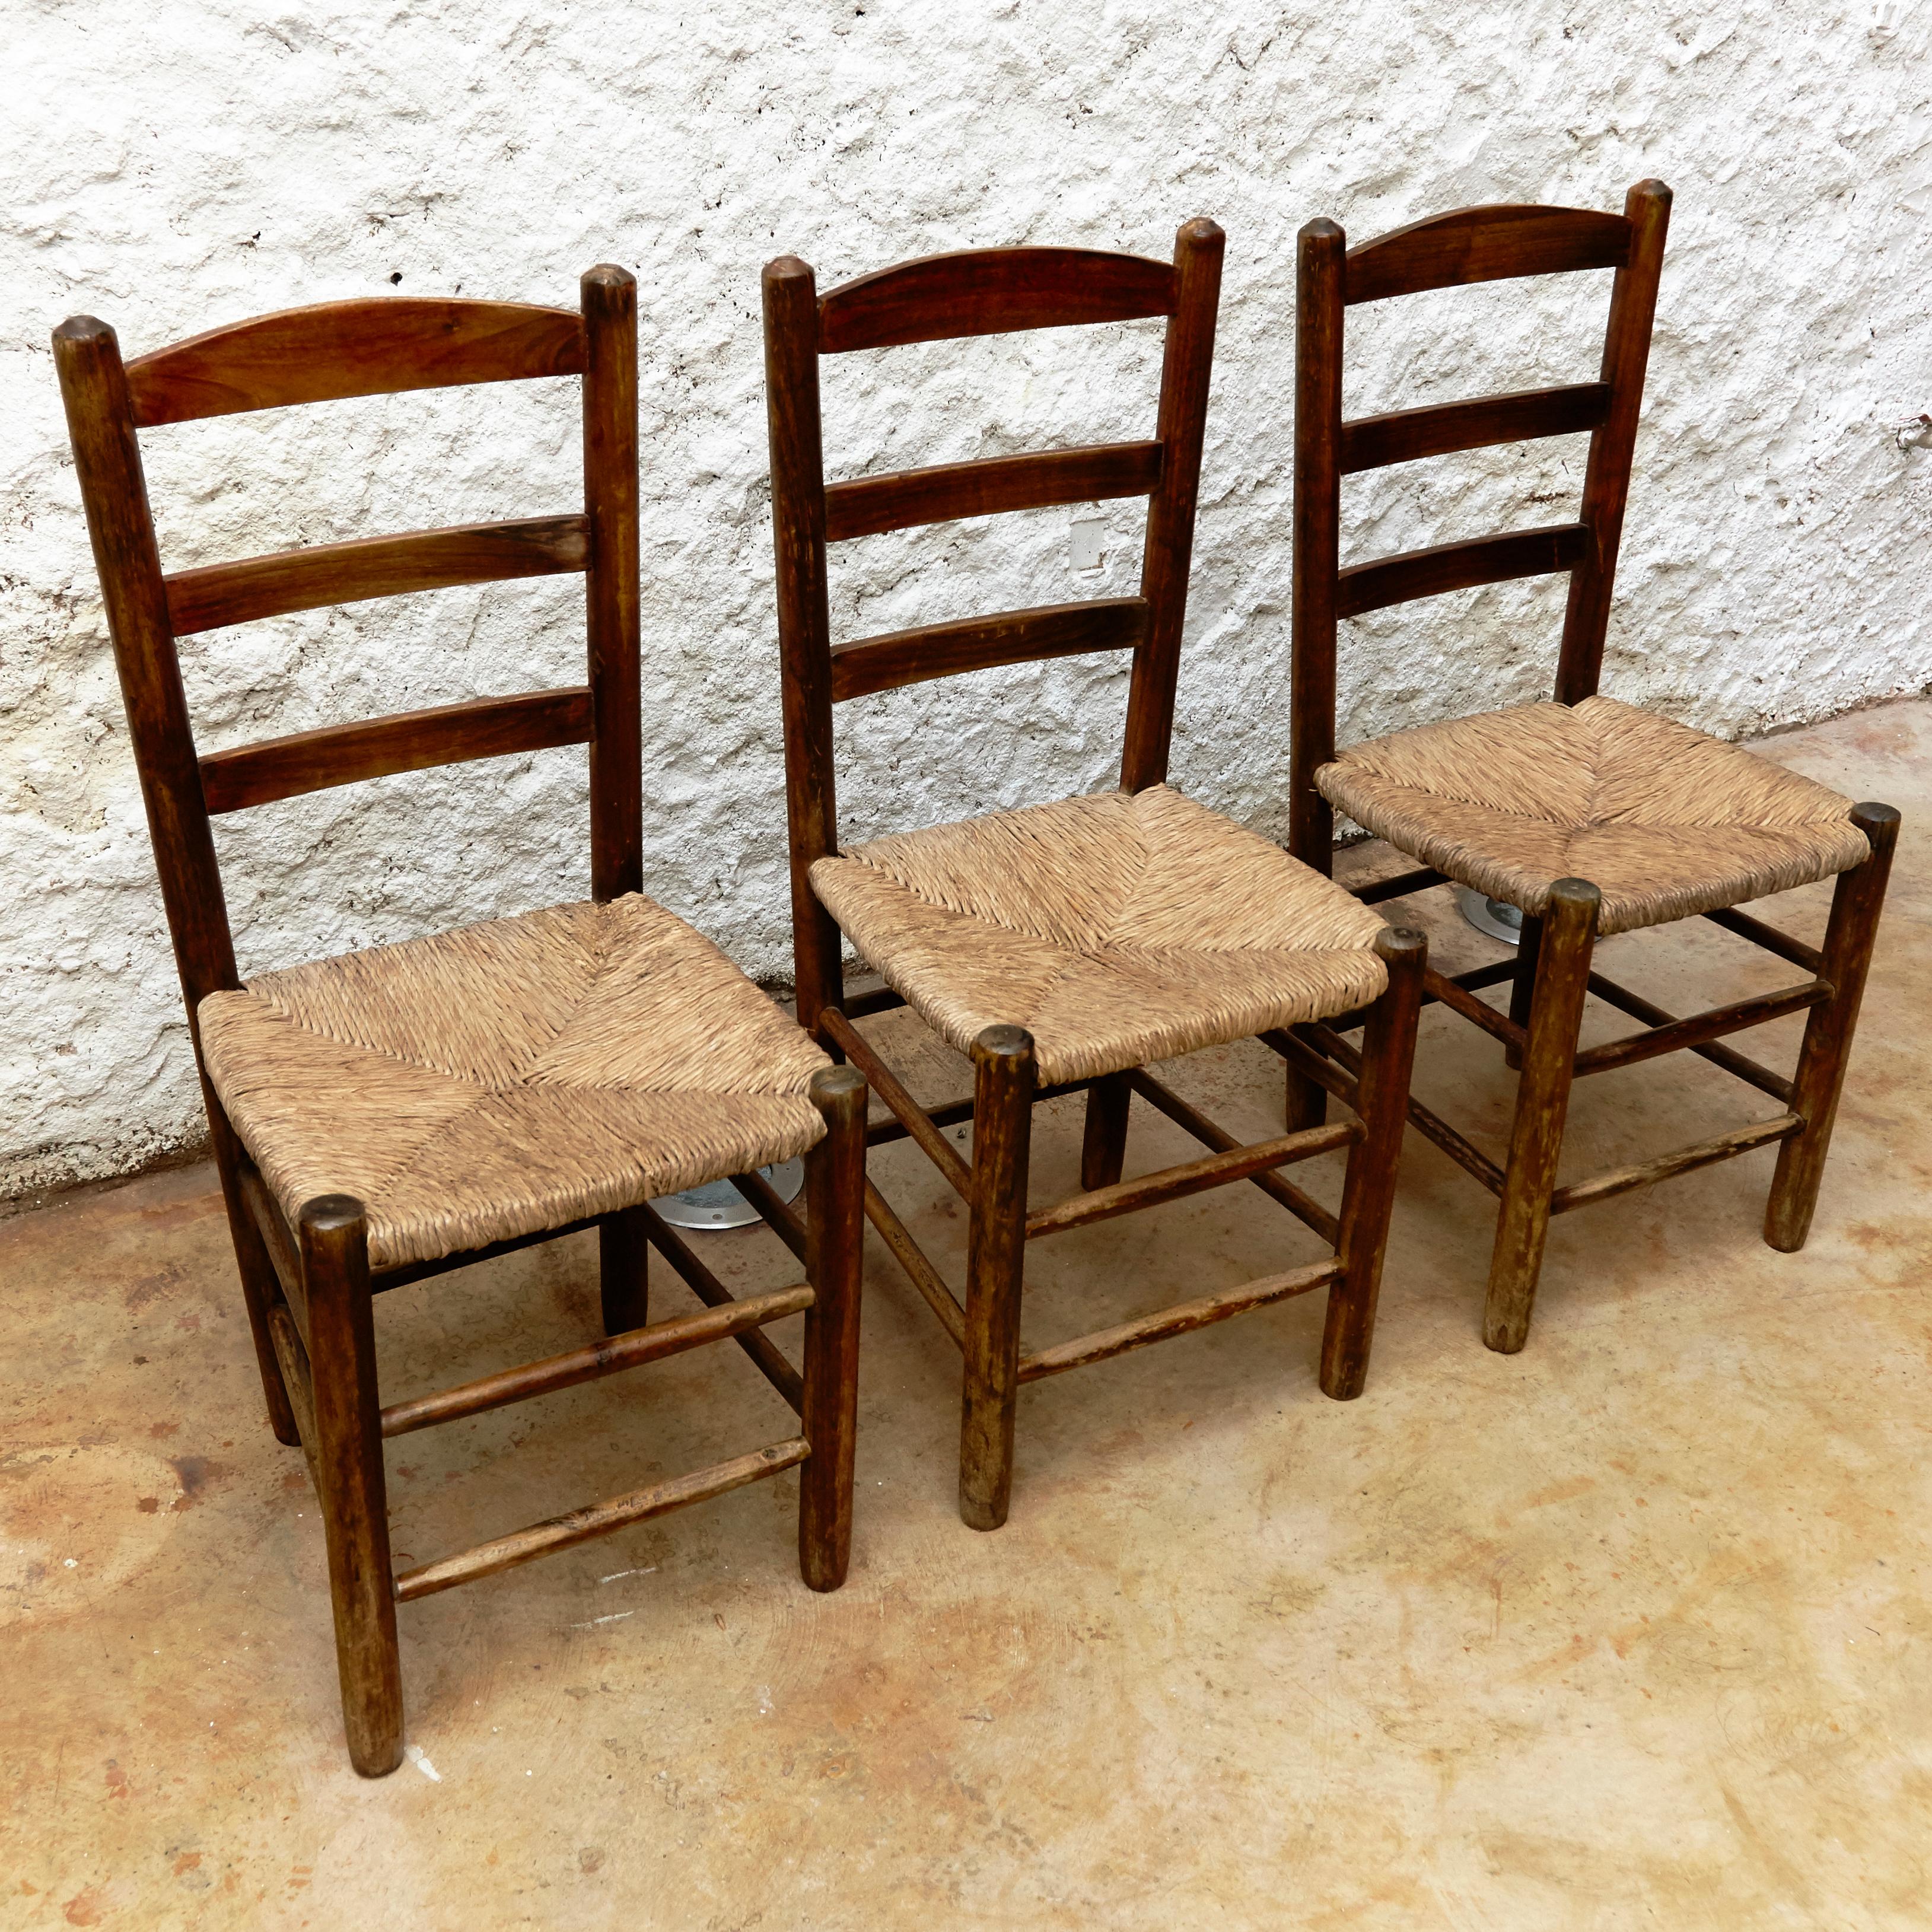 Mid-Century Modern Set of Six Chairs in the style of Charlotte Perriand, Wood & Rattan, circa 1950